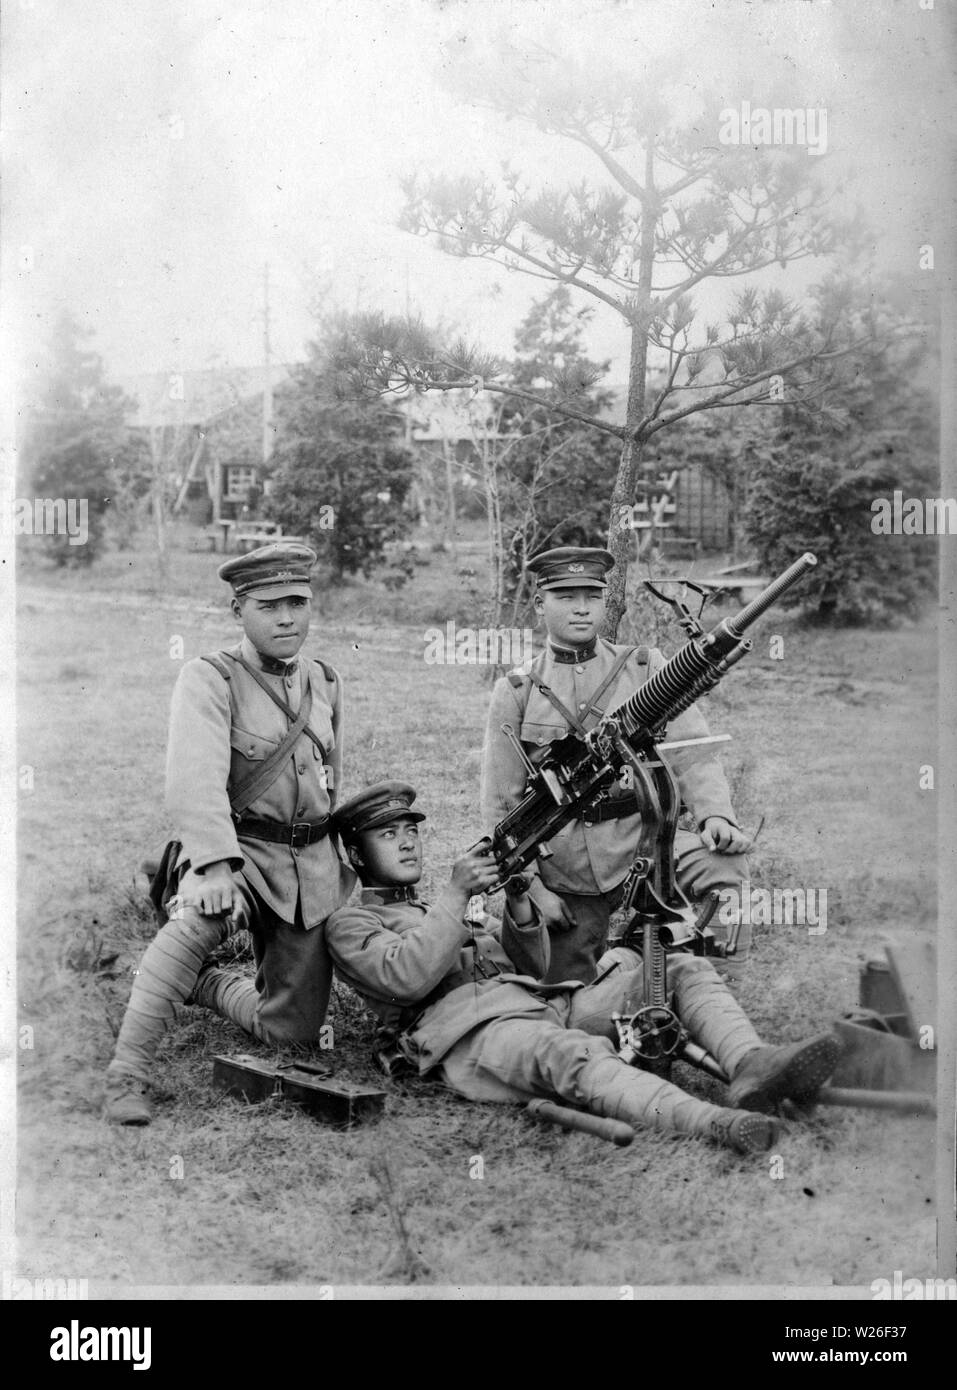 [ 1920s Japan - Japanese Soldiers with Machine Gun ] —   Three soldiers with what appears to be a Type 3 Heavy Machine Gun (Sannen-shiki Juu-kikanjuu).  From a private photo album of a member of the Japanese Imperial Guard (Konoe Shidan) who served between 1928 (Showa 3) and 1930 (Showa 5).  20th century vintage gelatin silver print. Stock Photo